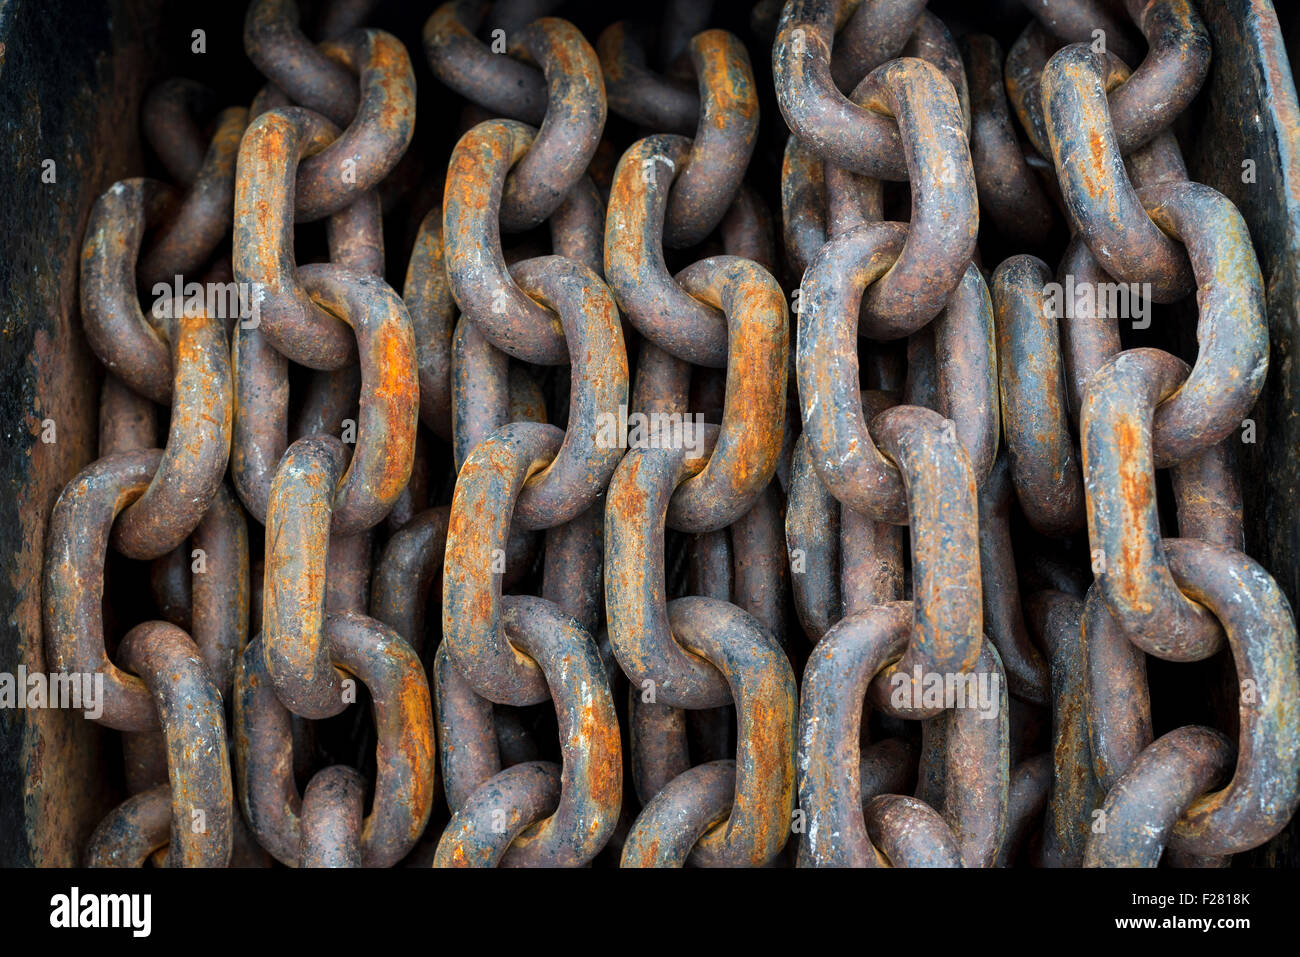 Anchor chain on the deck of a ship. Stock Photo